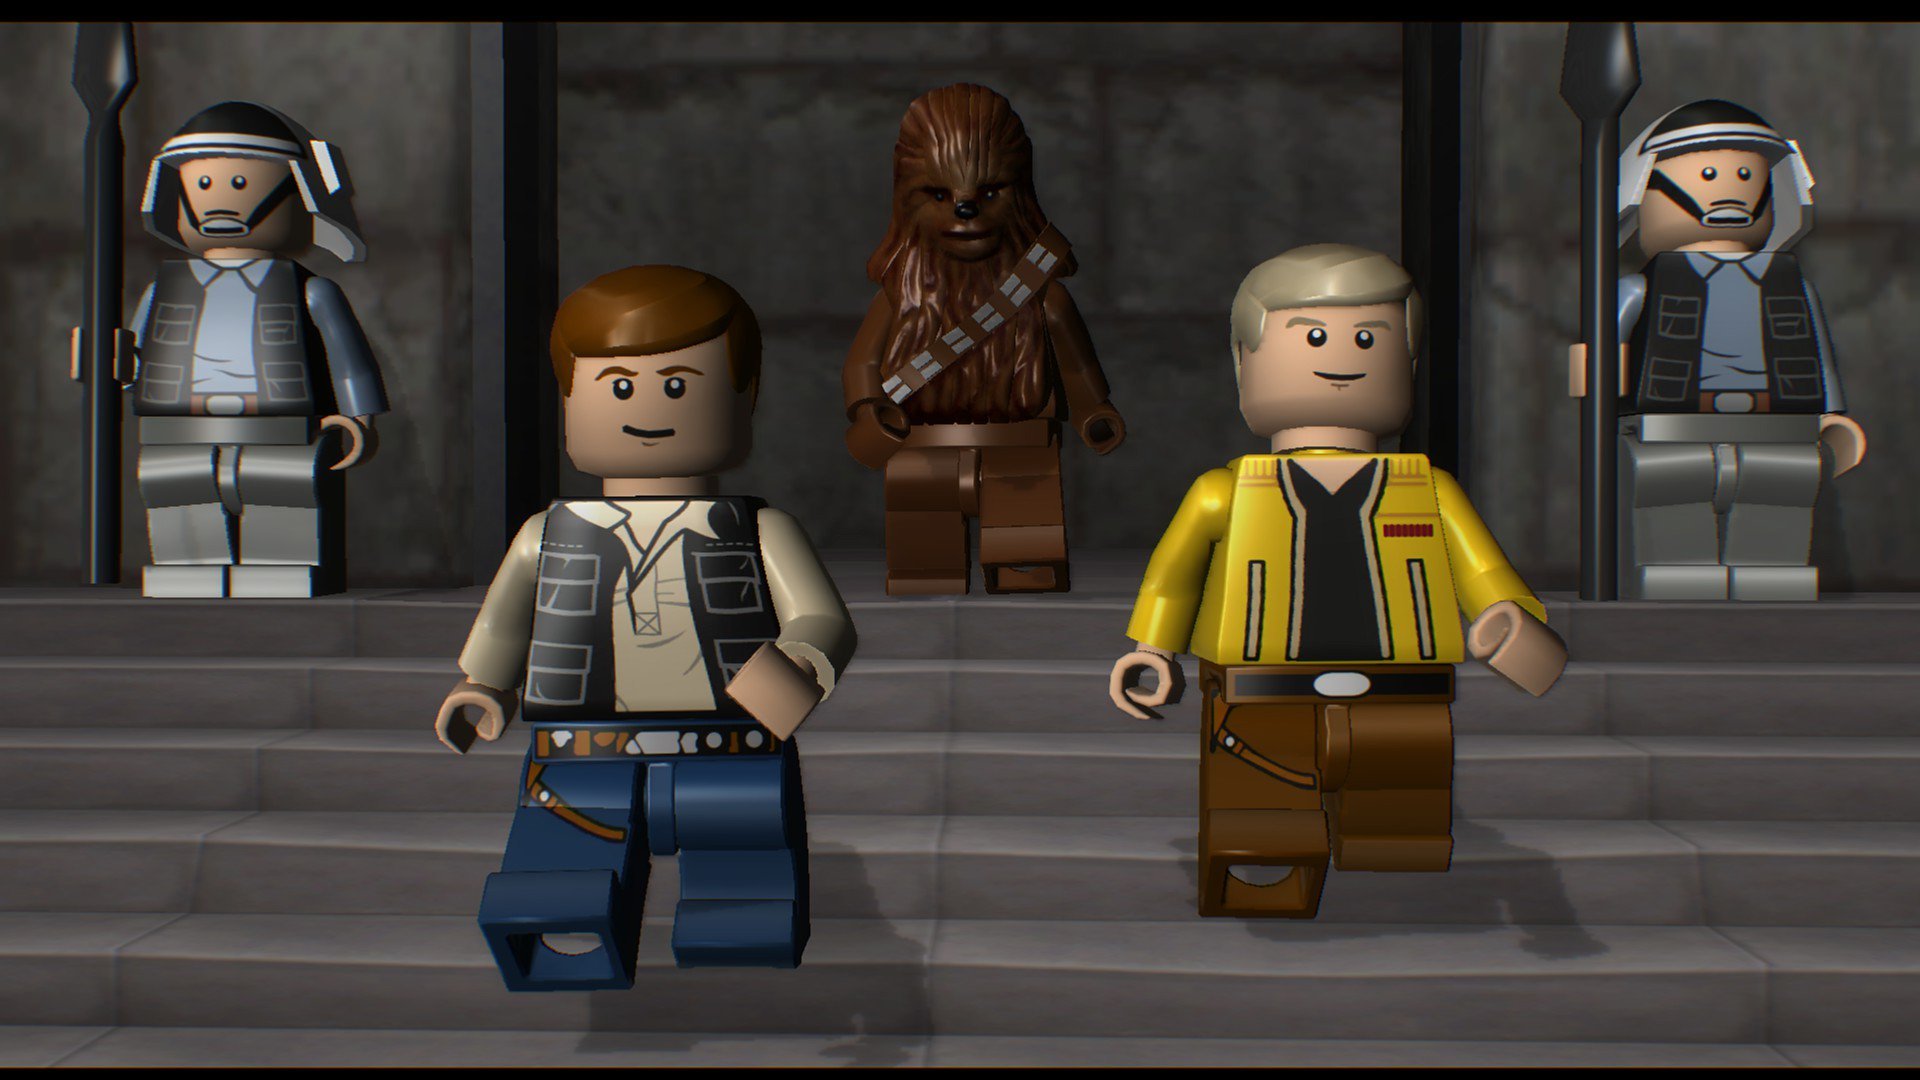 ModDB by the upcoming Lego Start Wars: The SkyWalker Saga, this texmod pack brings the character designs of Lego Star Wars: The Complete Saga closer to modern Lego games